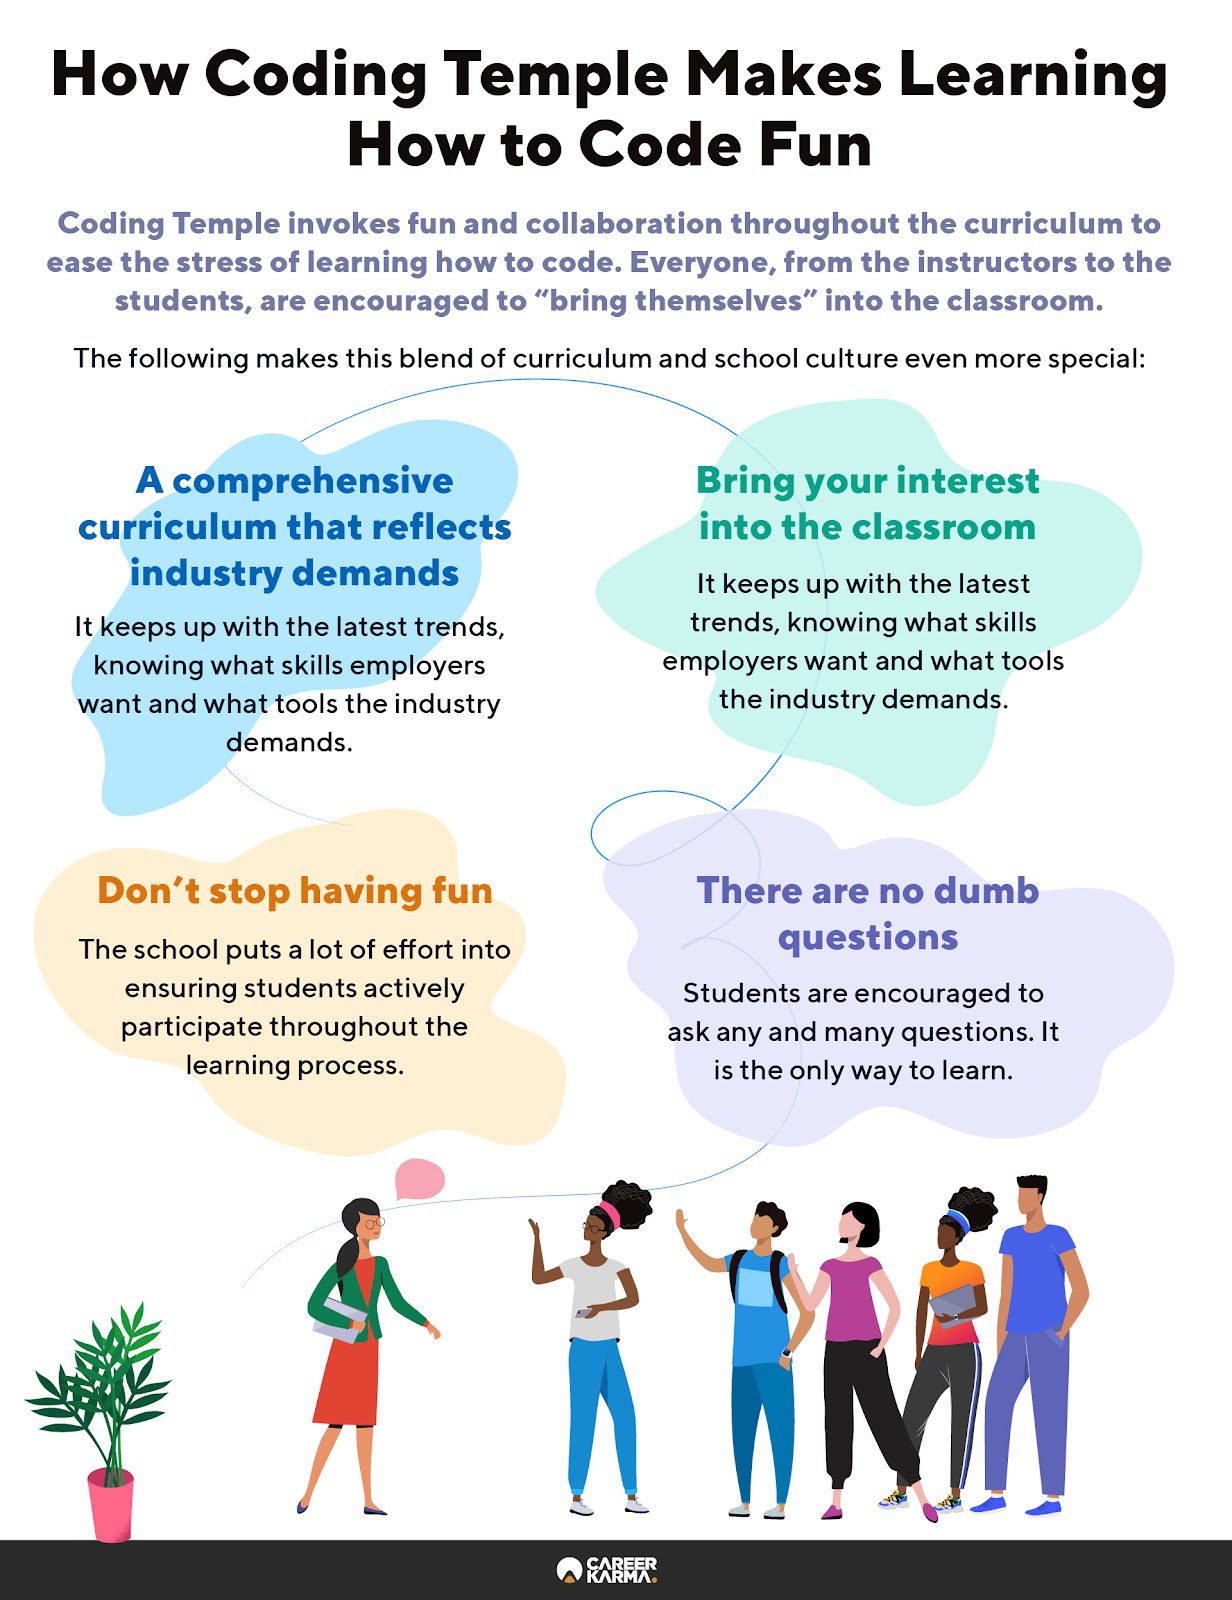 An infographic showing the key aspects of Coding Temple’s school culture